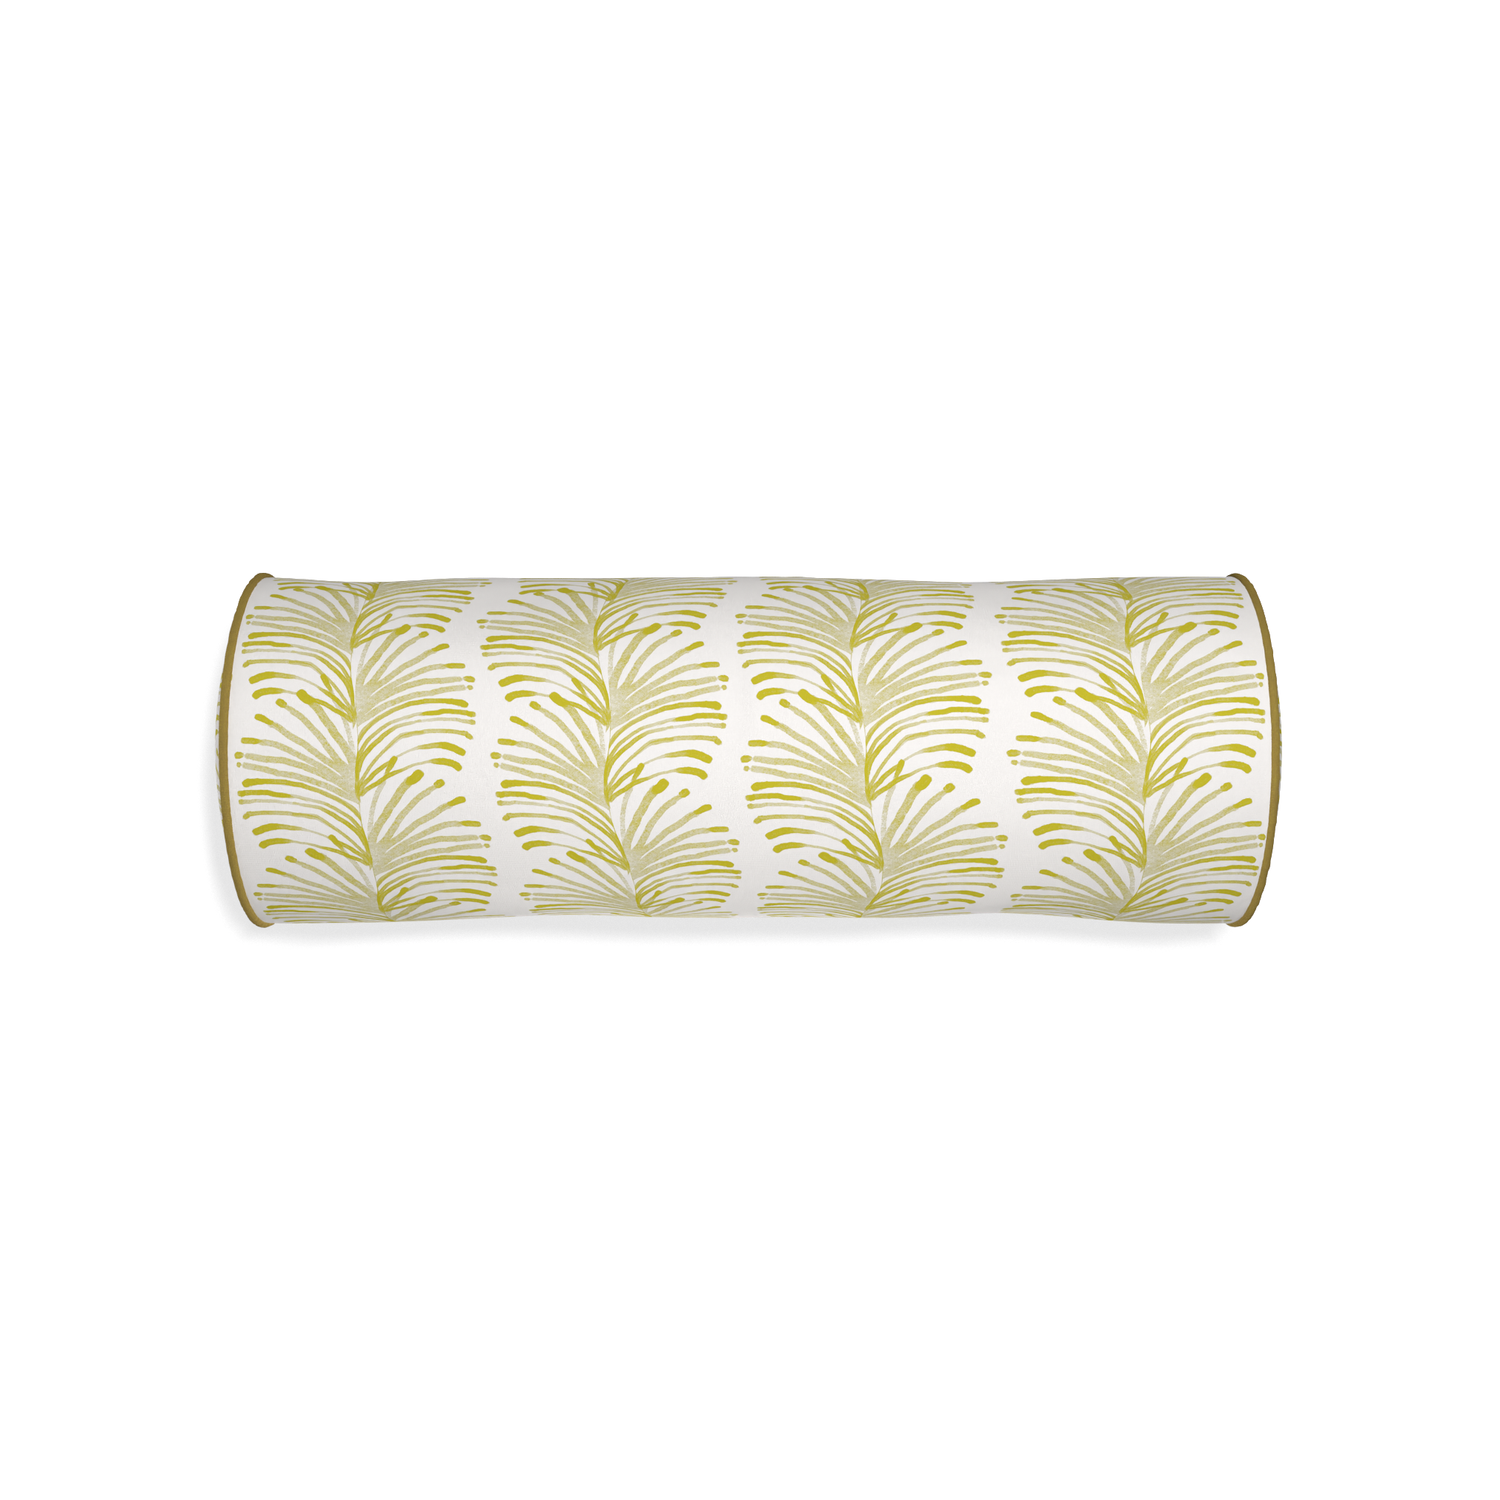 Bolster emma chartreuse custom yellow stripe chartreusepillow with c piping on white background